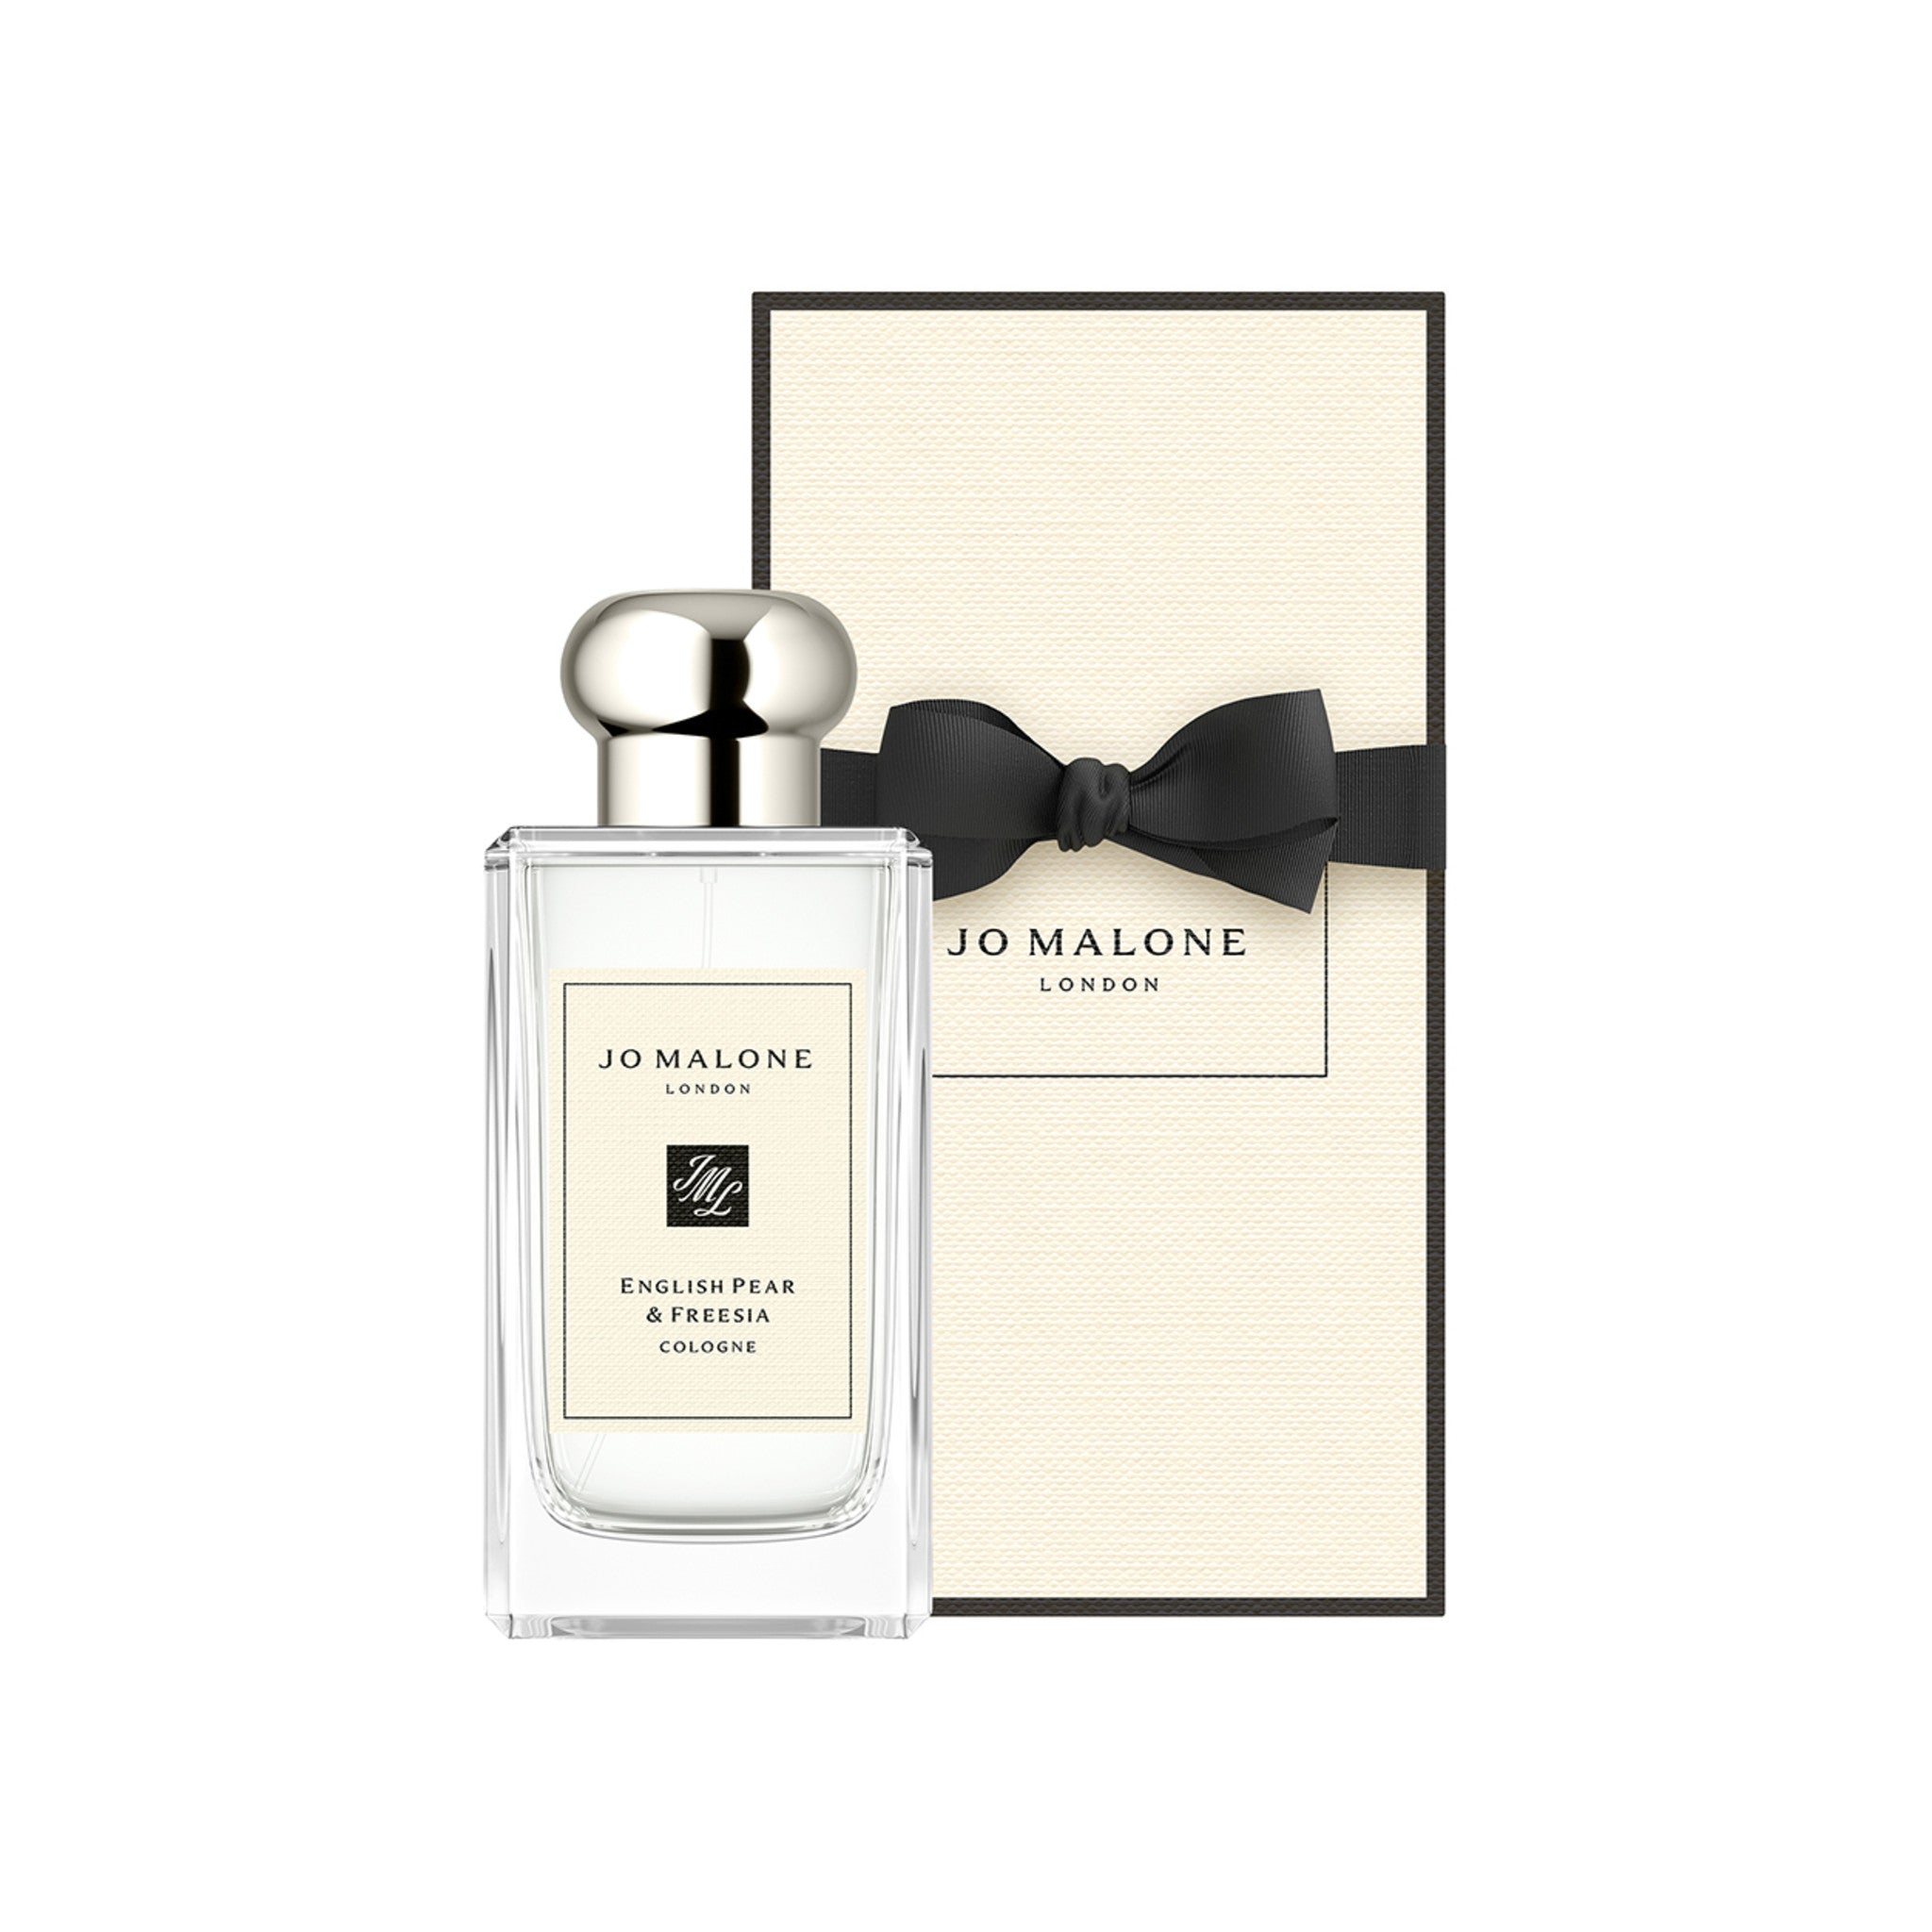 Jo Malone London English Pear and Freesia Cologne Size variant: 100 ml main image.